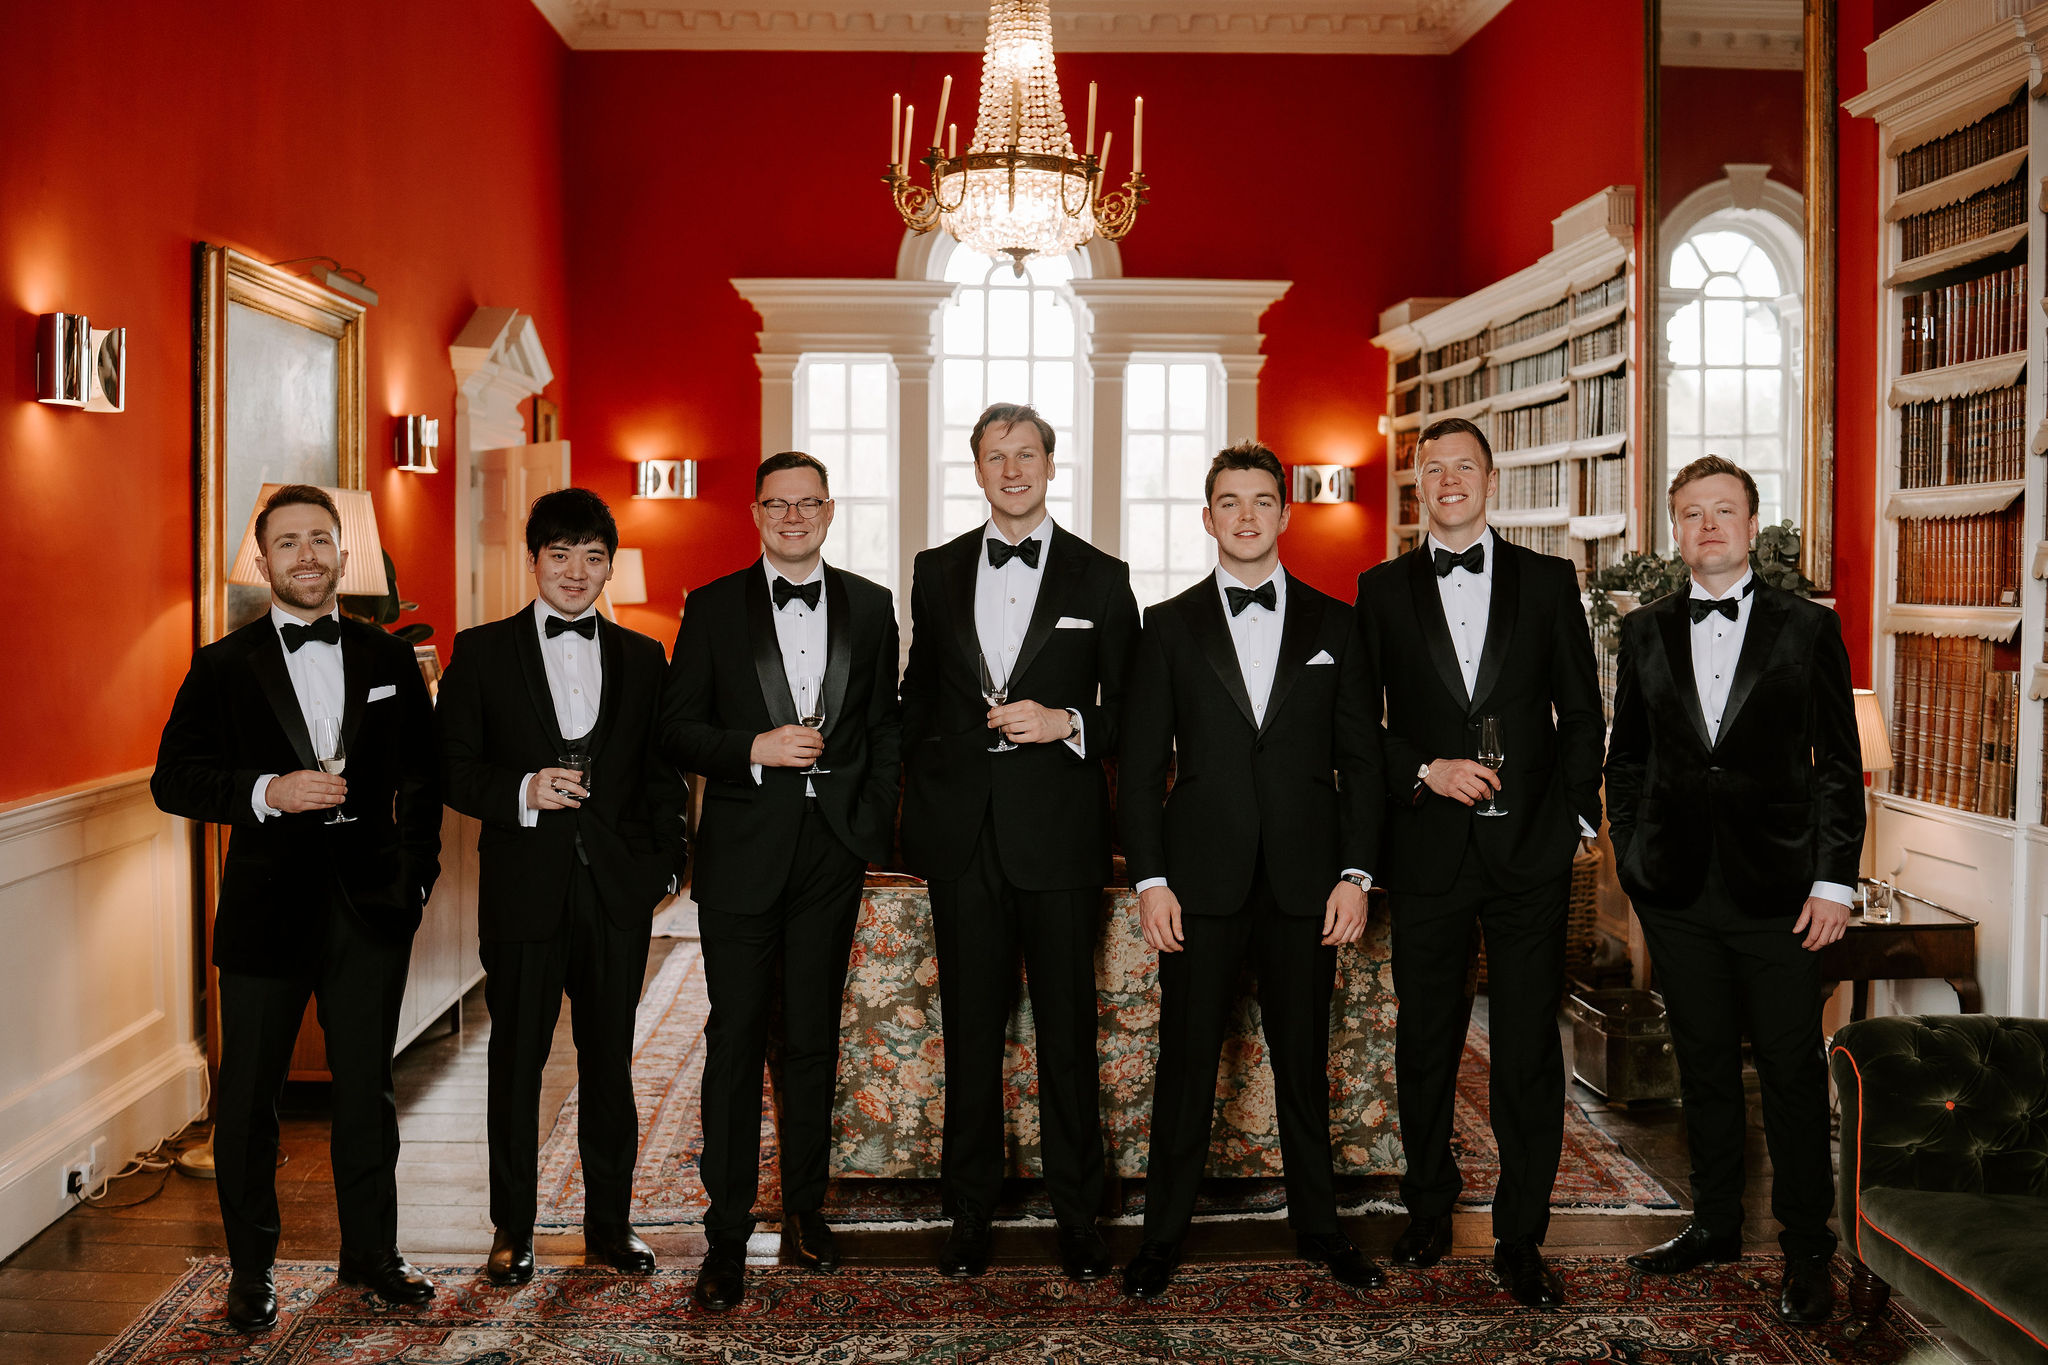 Seven men in black tie line up in a row holding glasses of champagne in an antique library painted red